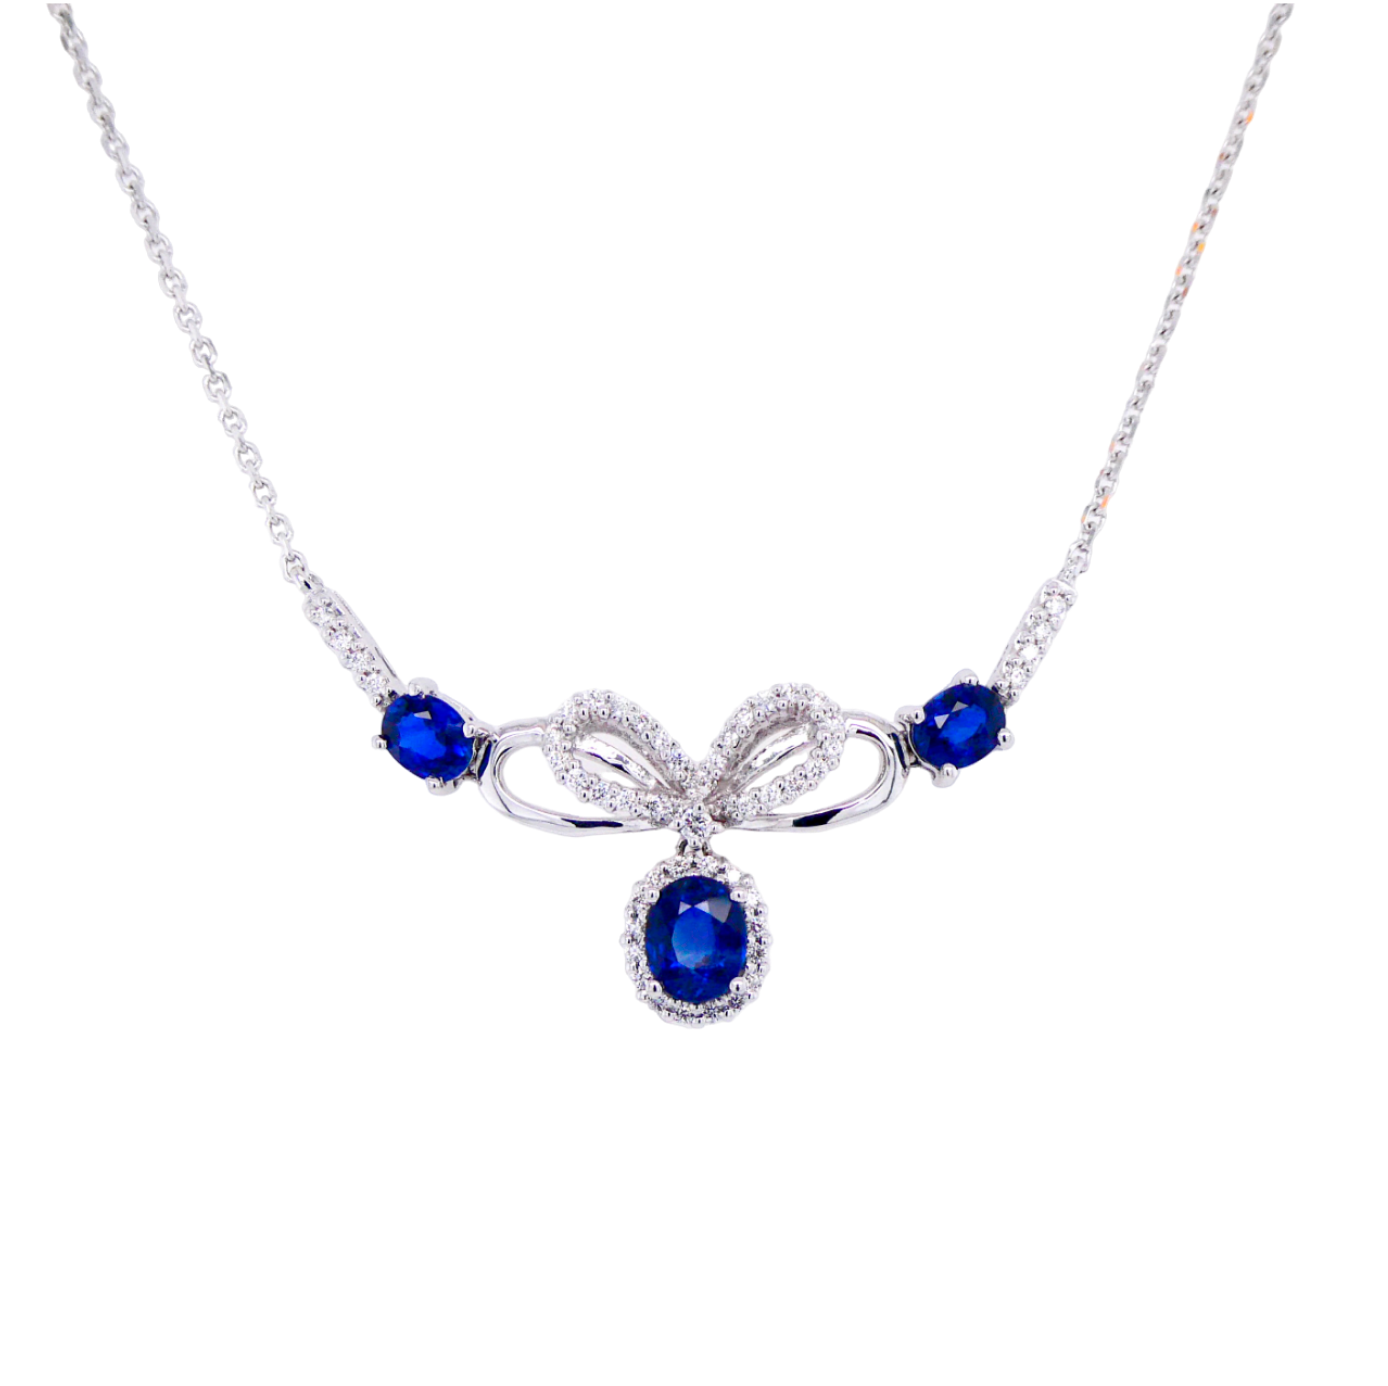 Toodie's Signature Fashion White Gold Sapphire And Diamond Necklace  230-00223 - Toodie's Fine Jewelry